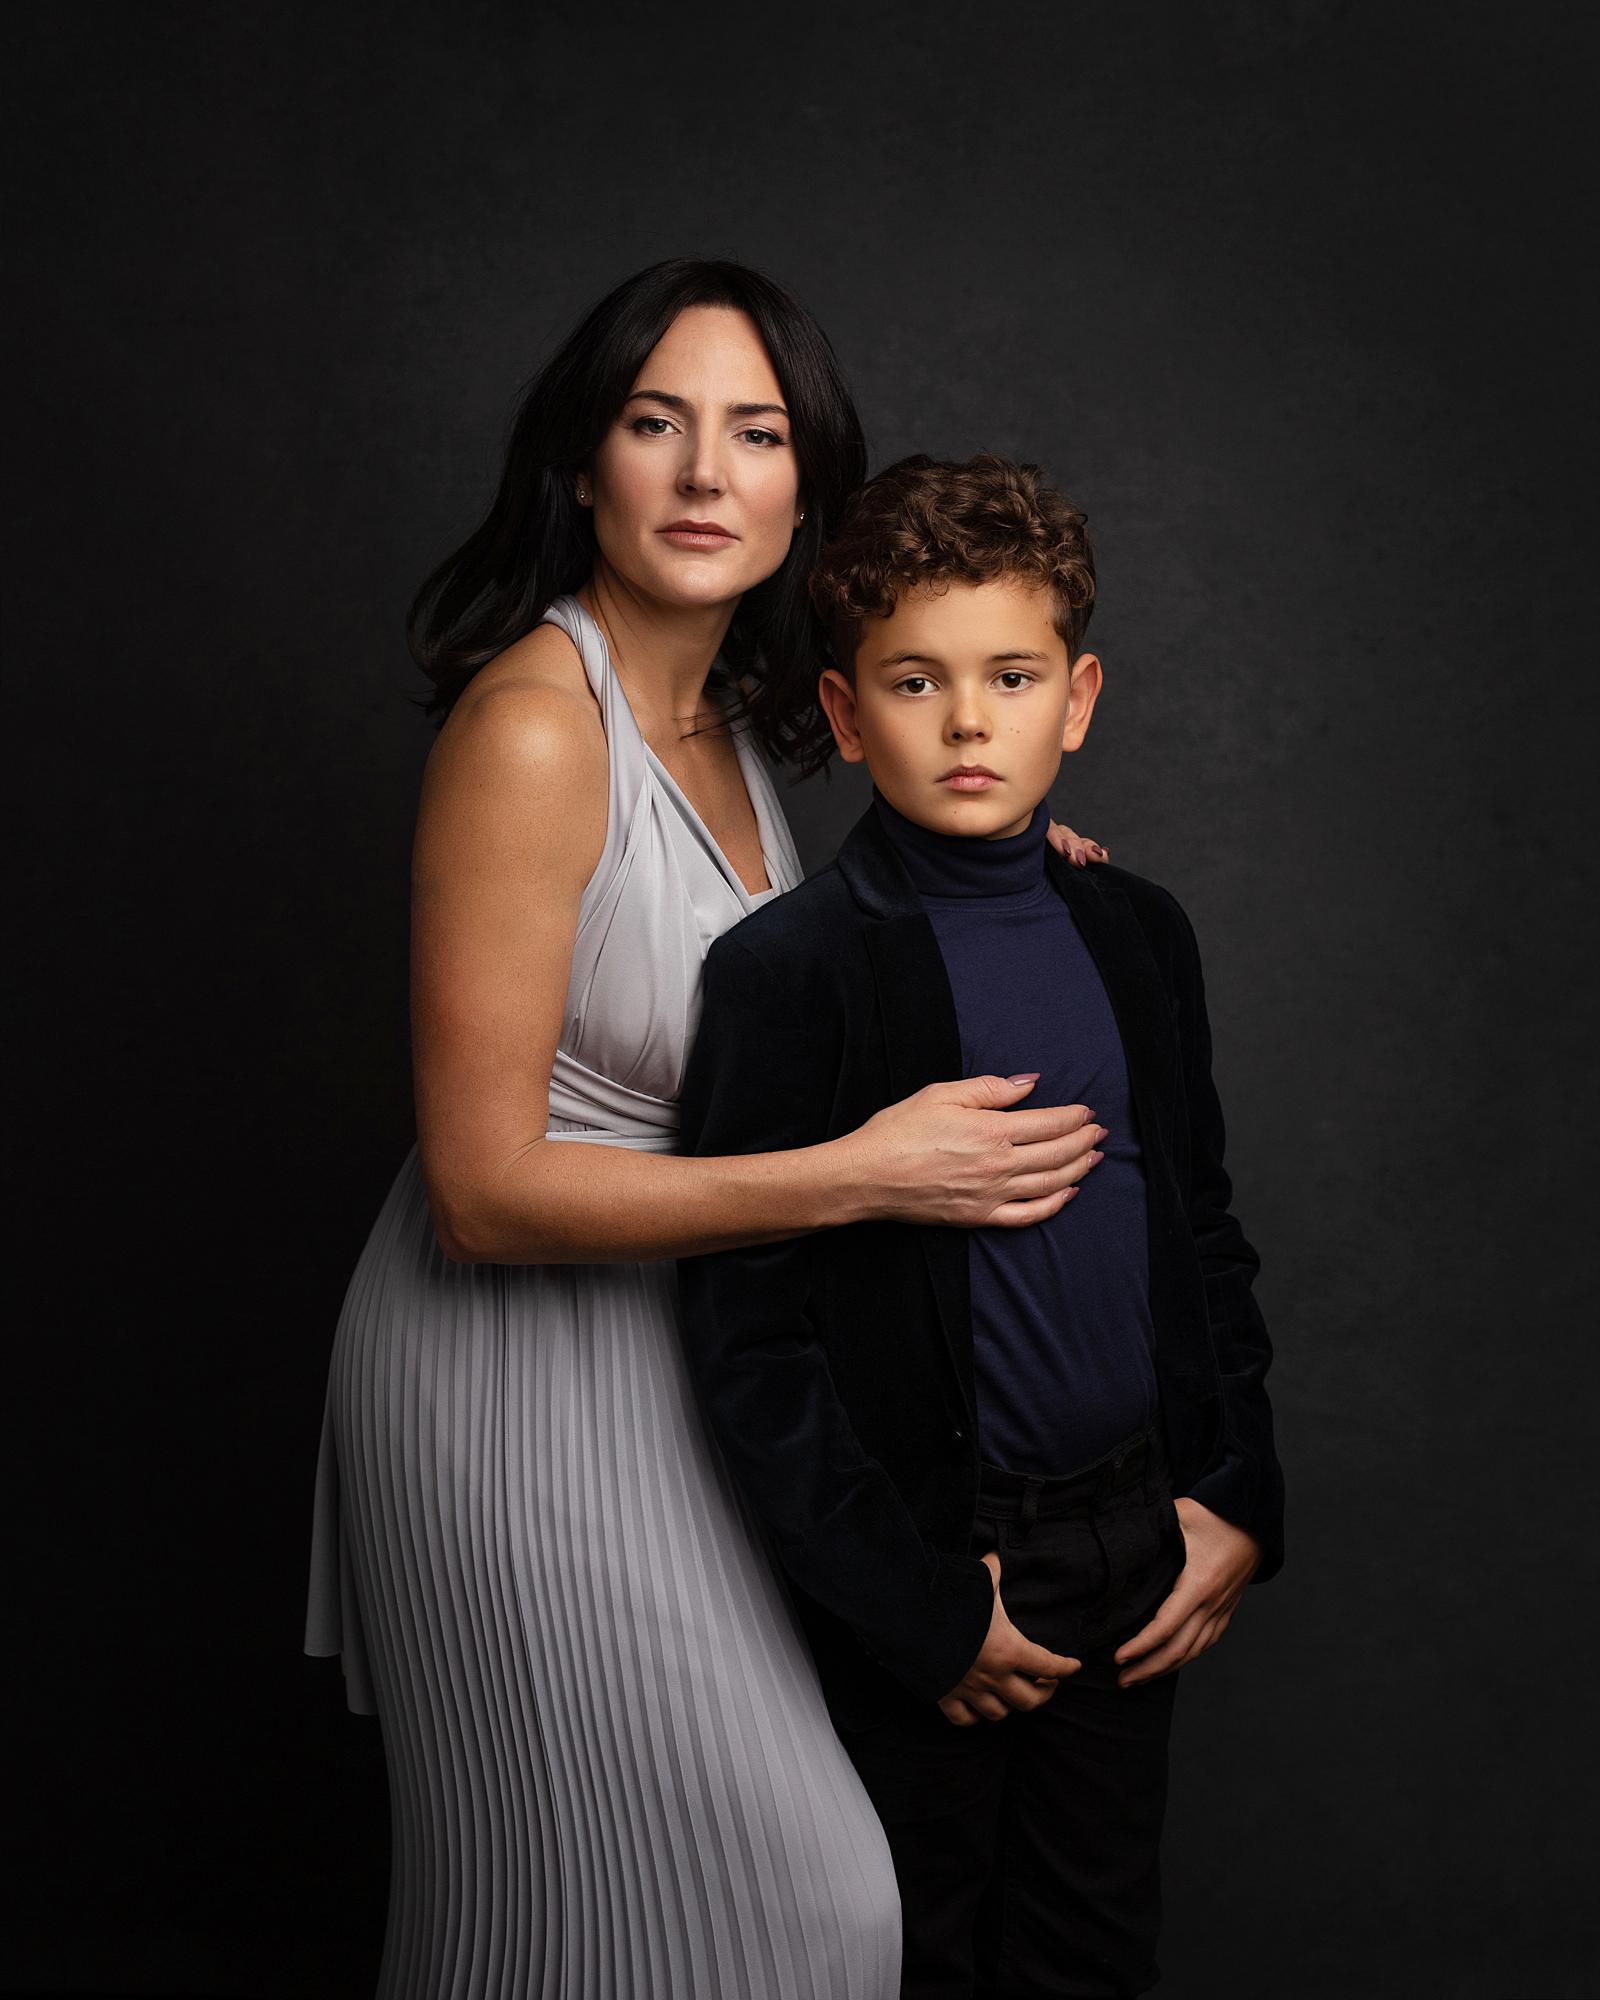 Black haired woman in a grey dress poses with her 9 year old son for a Beauty Shoot Photoshoot in a Suffolk studio